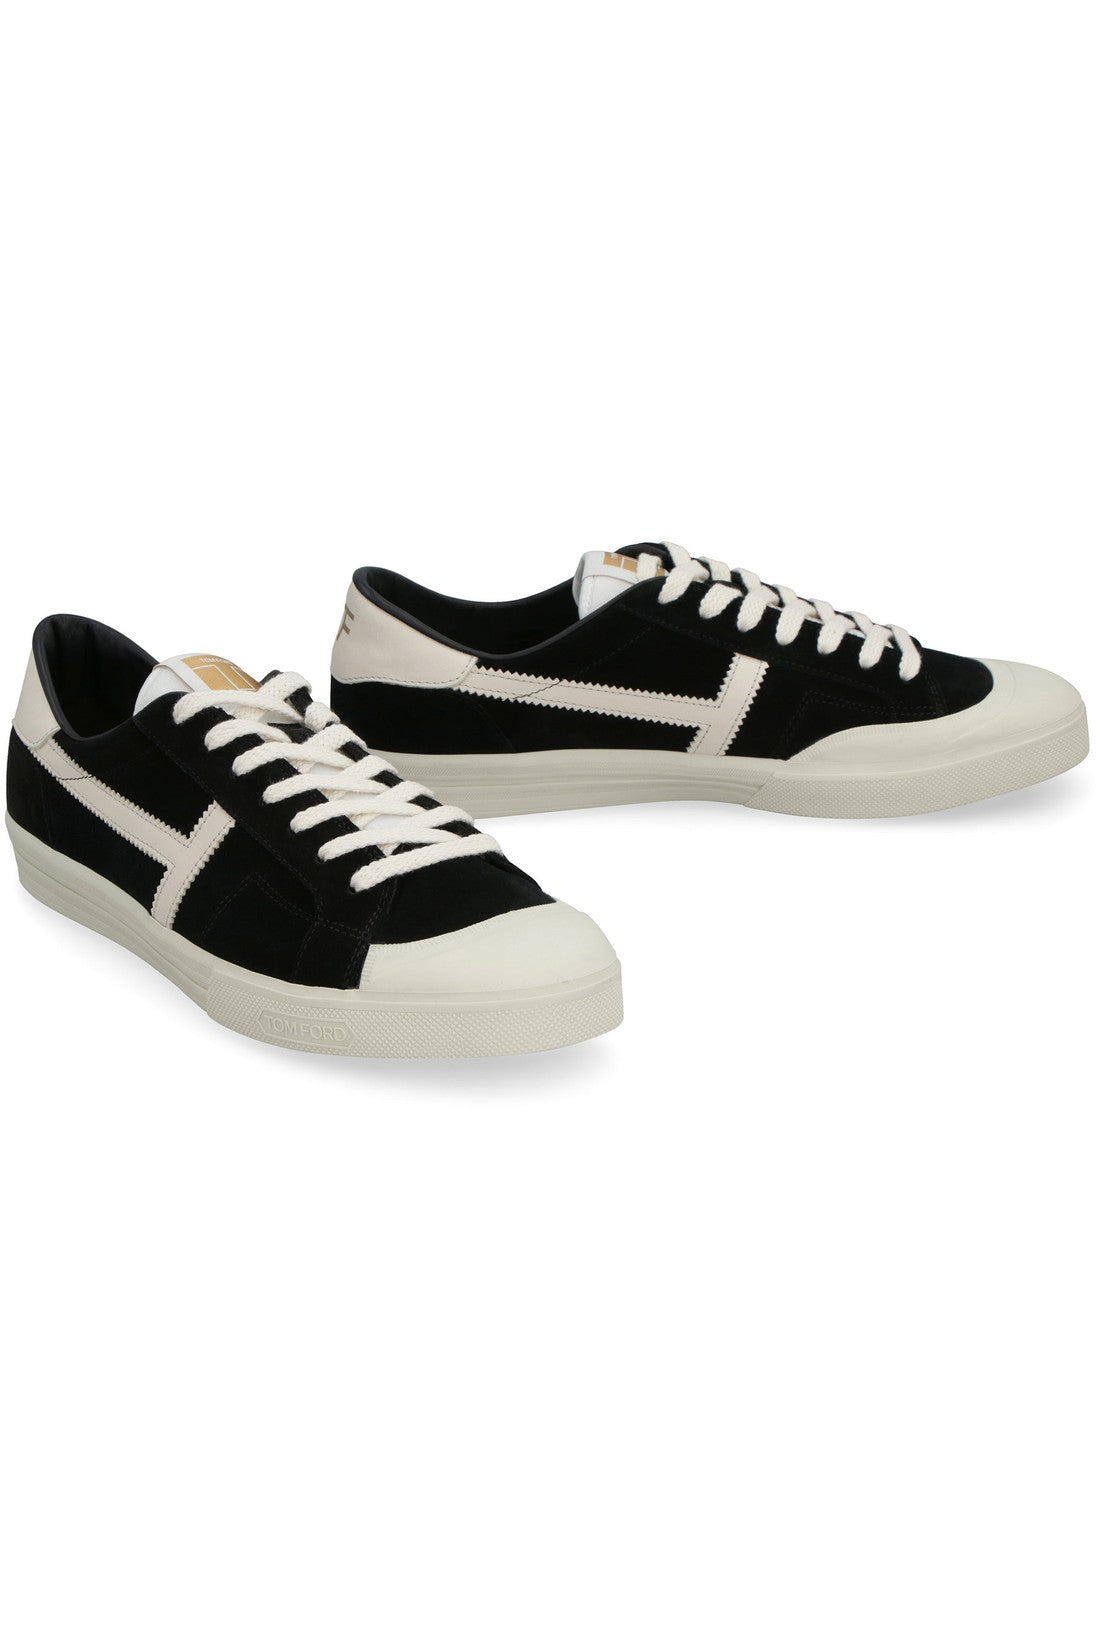 Tom Ford-OUTLET-SALE-Jarvis suede sneakers-ARCHIVIST